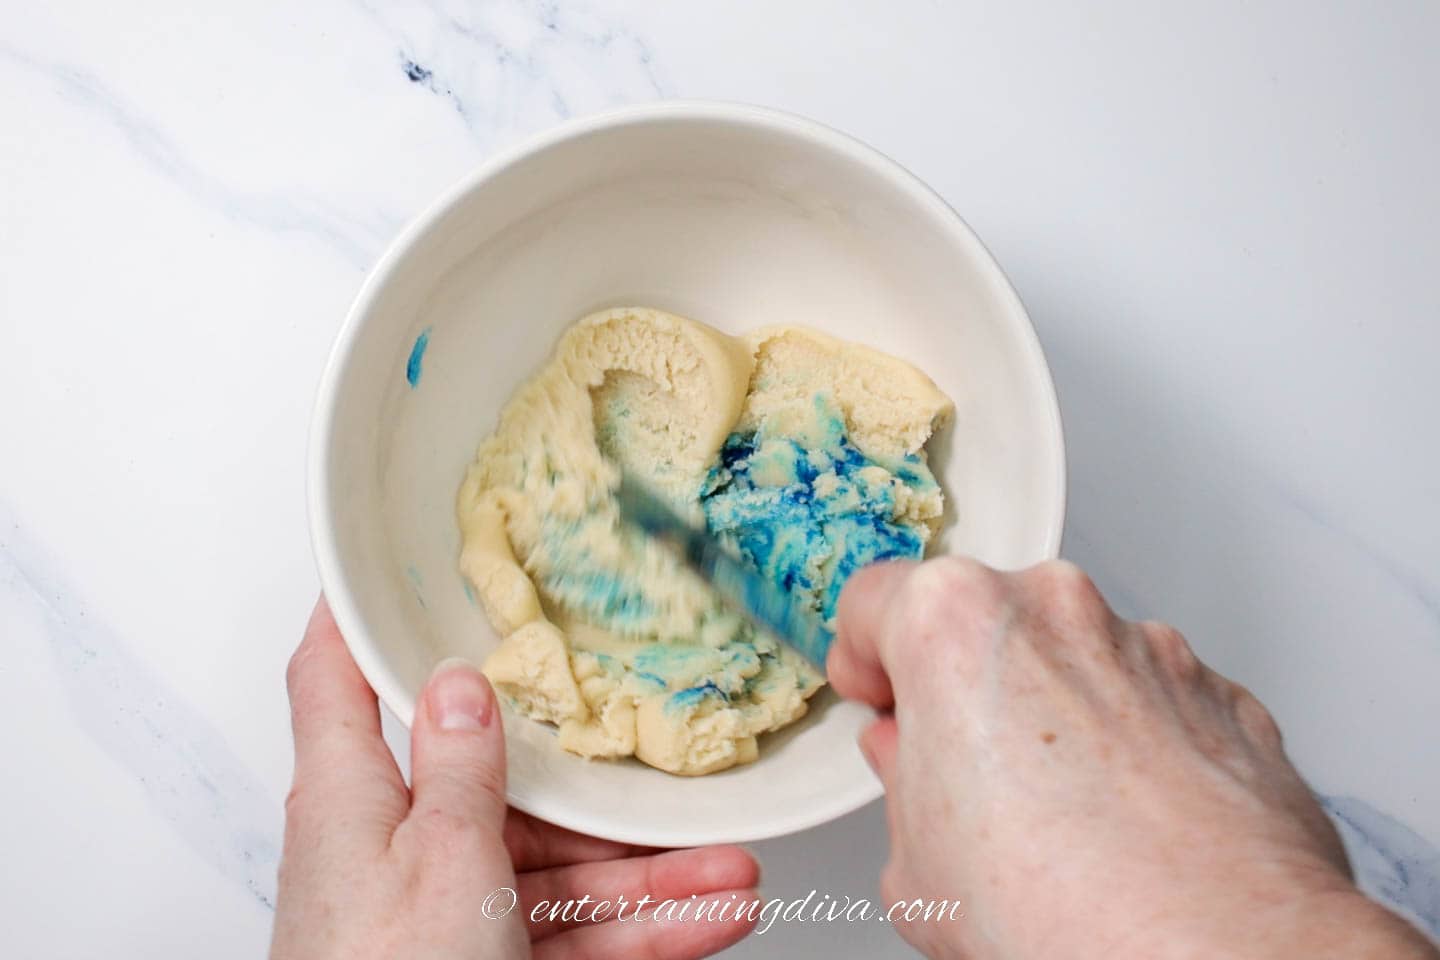 Blue food coloring being added to cookie dough